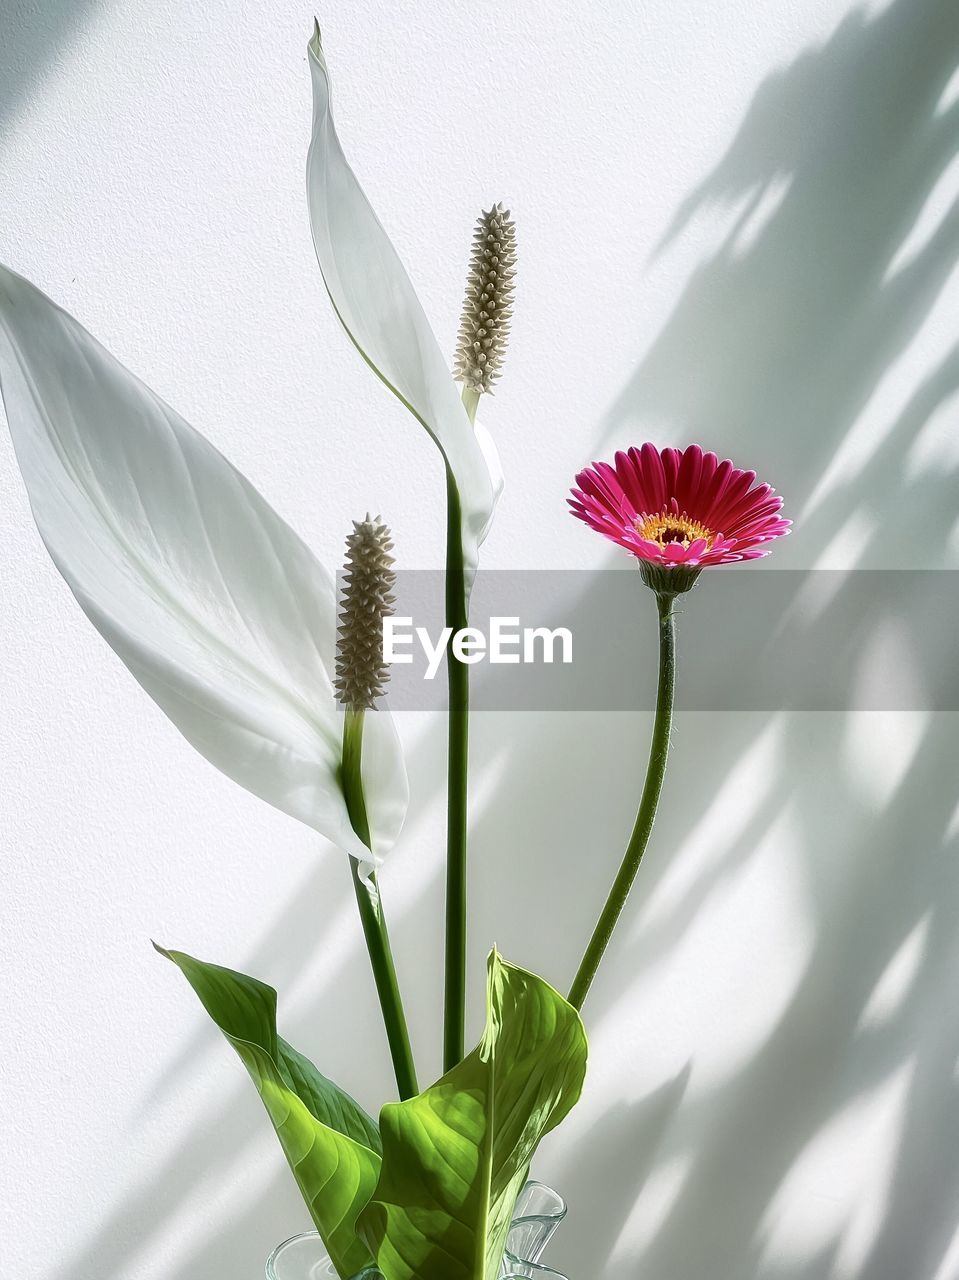 Single pink gerbera and two peace lily flowers against white, shadow patterned wall.